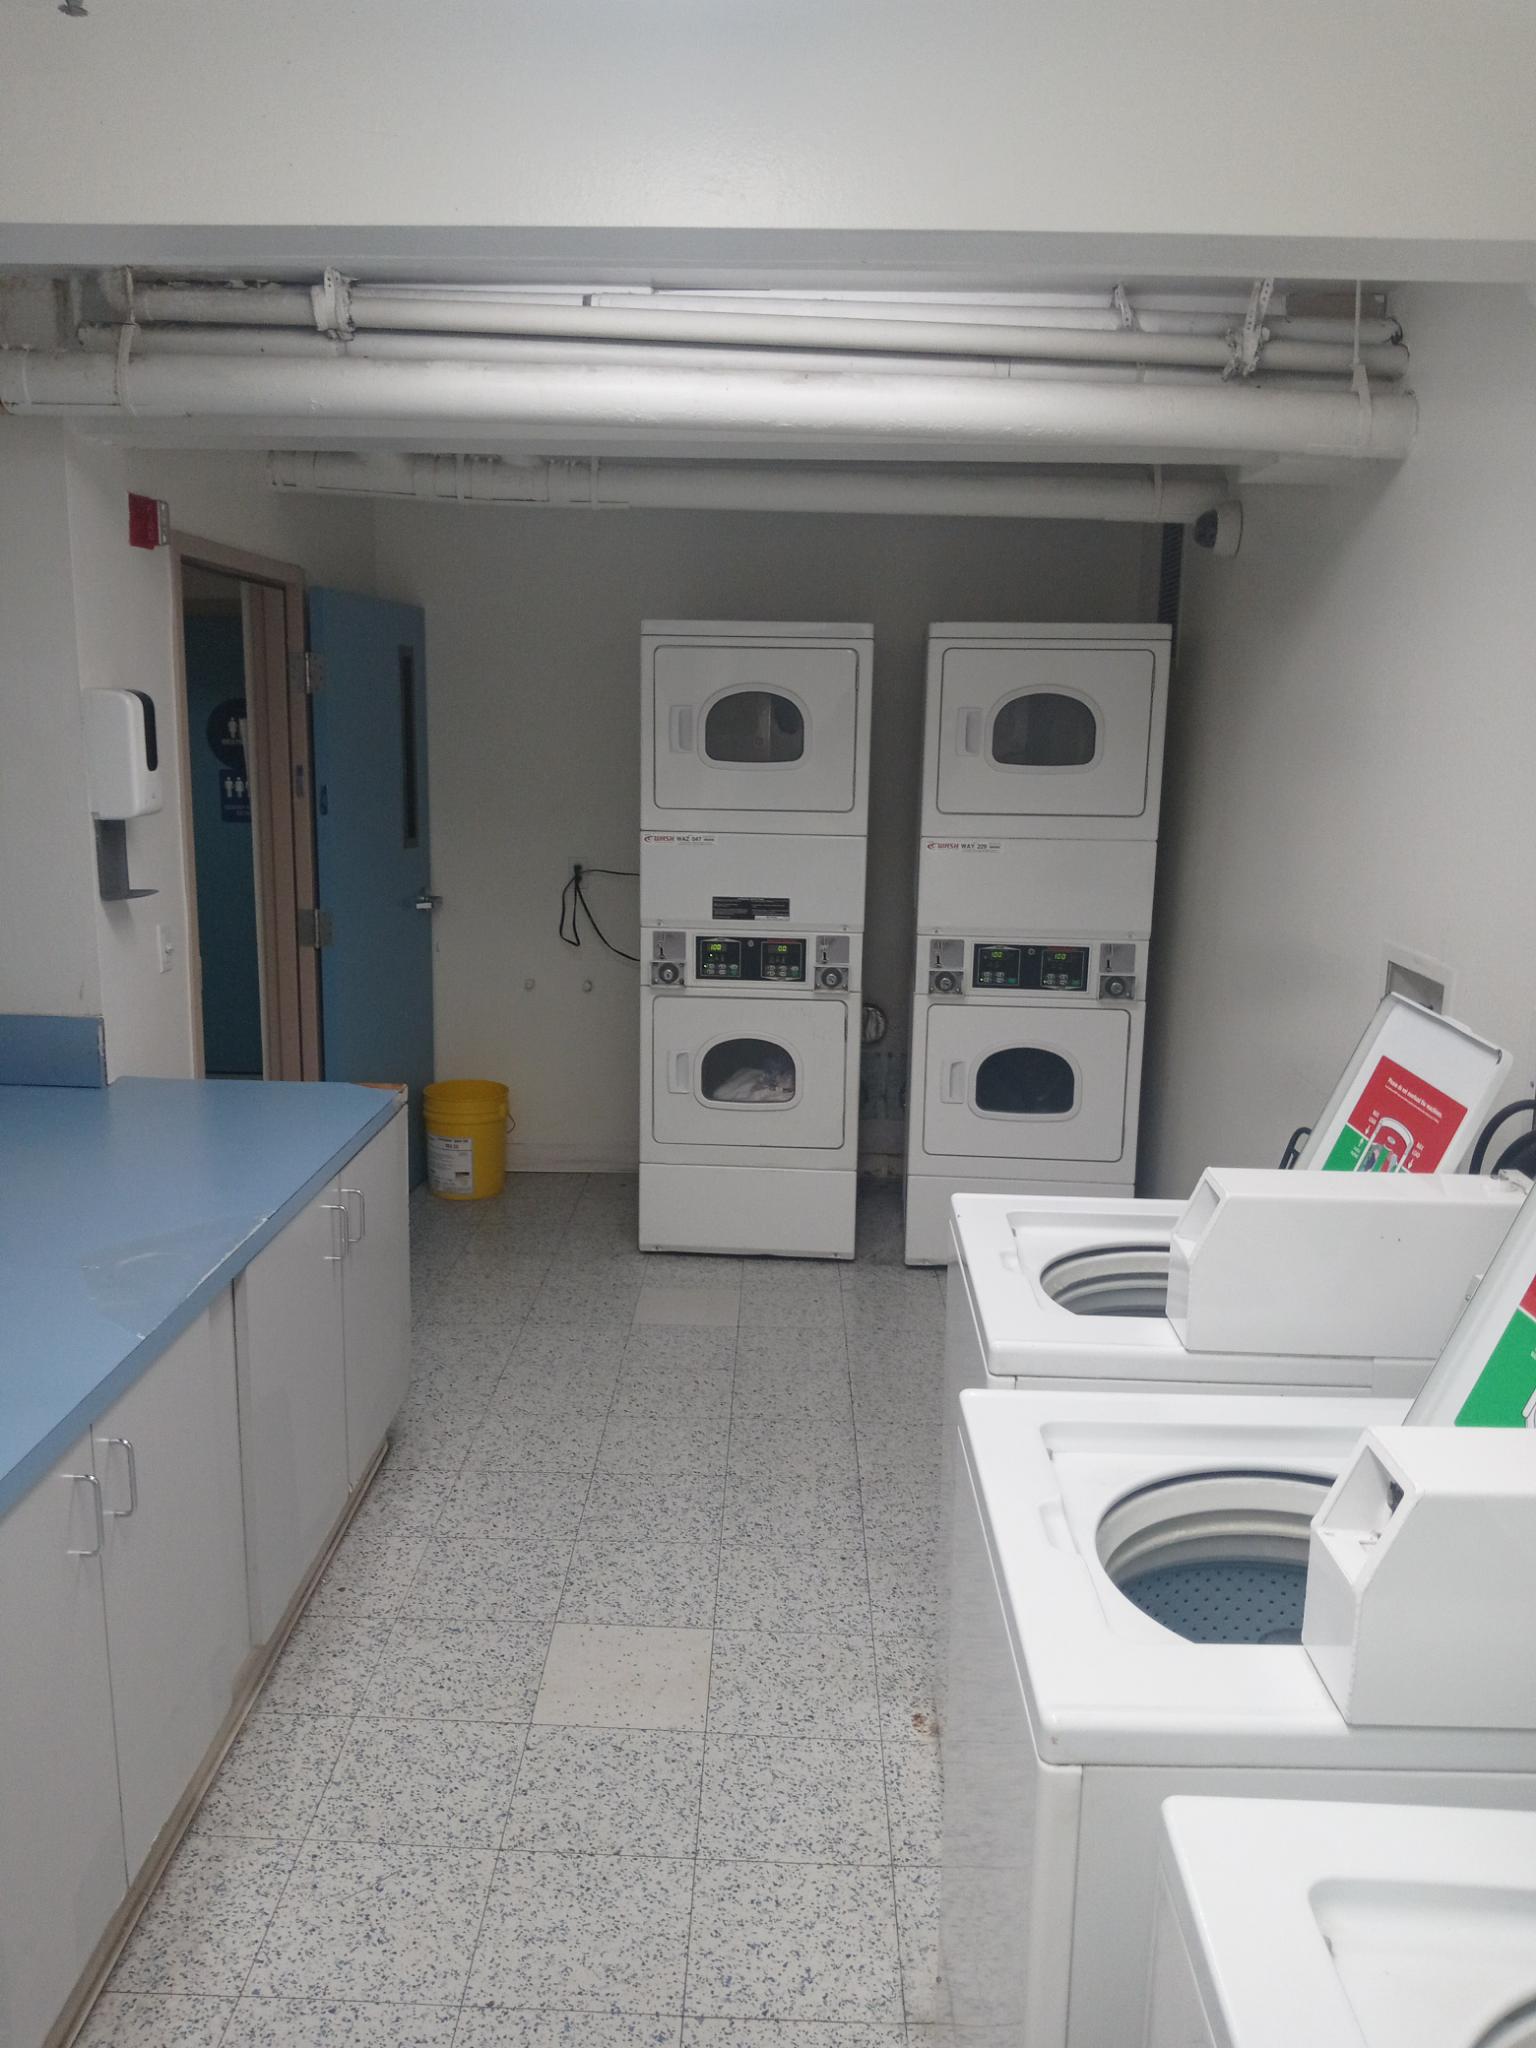 Laundry room. Three washing machines, four dryers and a flat surface for folding are visible. Blue door is propped open.